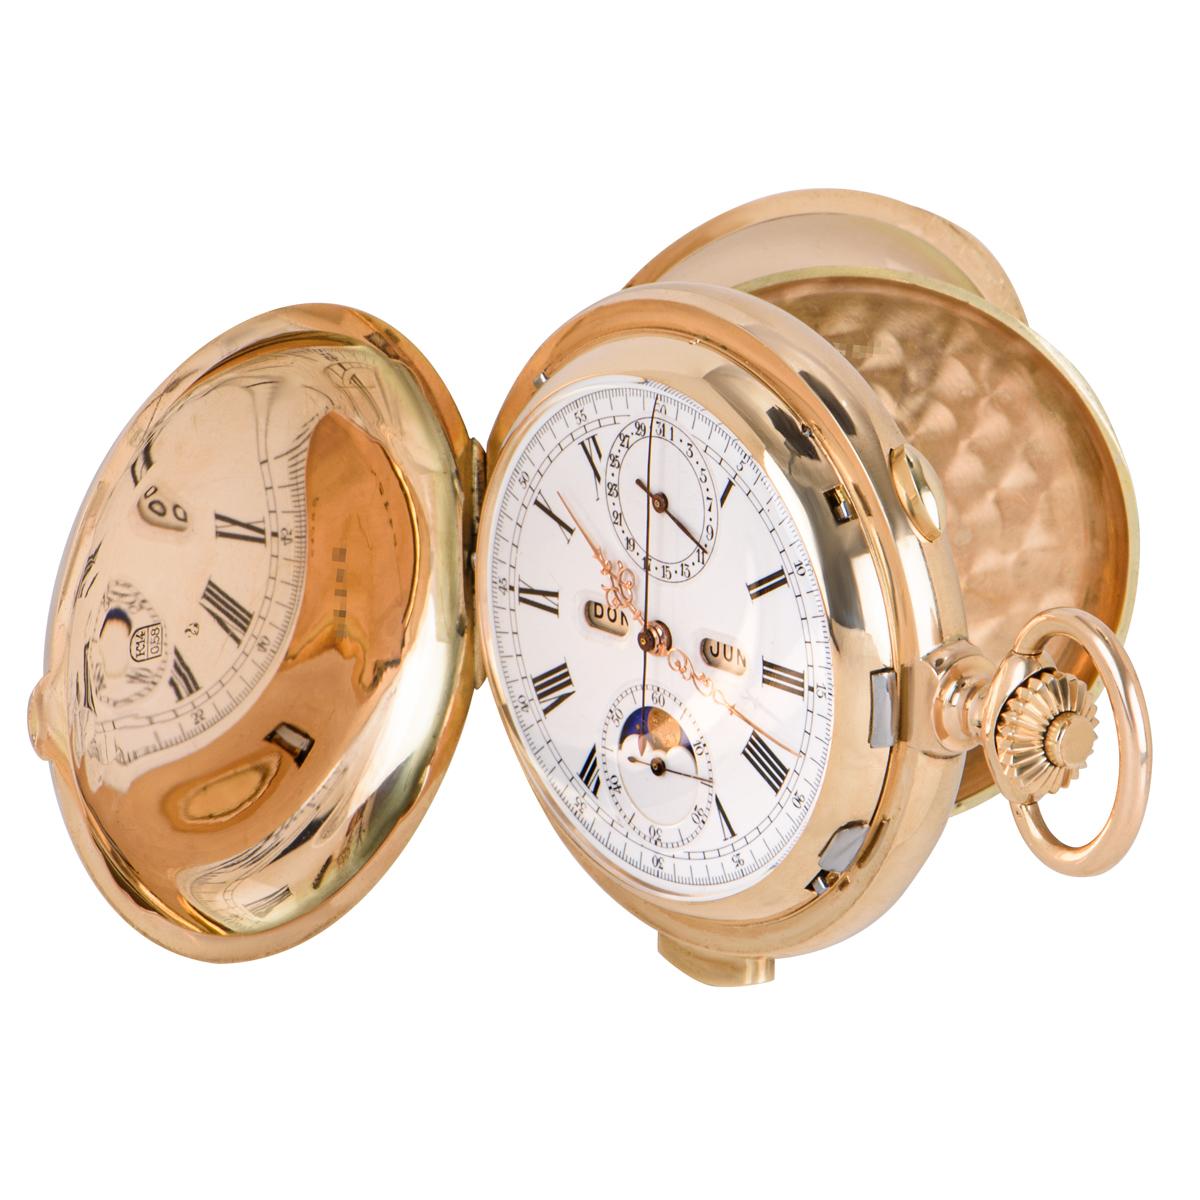 EDDA Watch Company 14ct rose gold full hunter minute repeater calendar chronograph pocket watch, C1900.

Dial: The perfect white enamel dial with Roman Numerals and sub dials for the date at twelve, seconds dial and lunar dial at six with jump dials